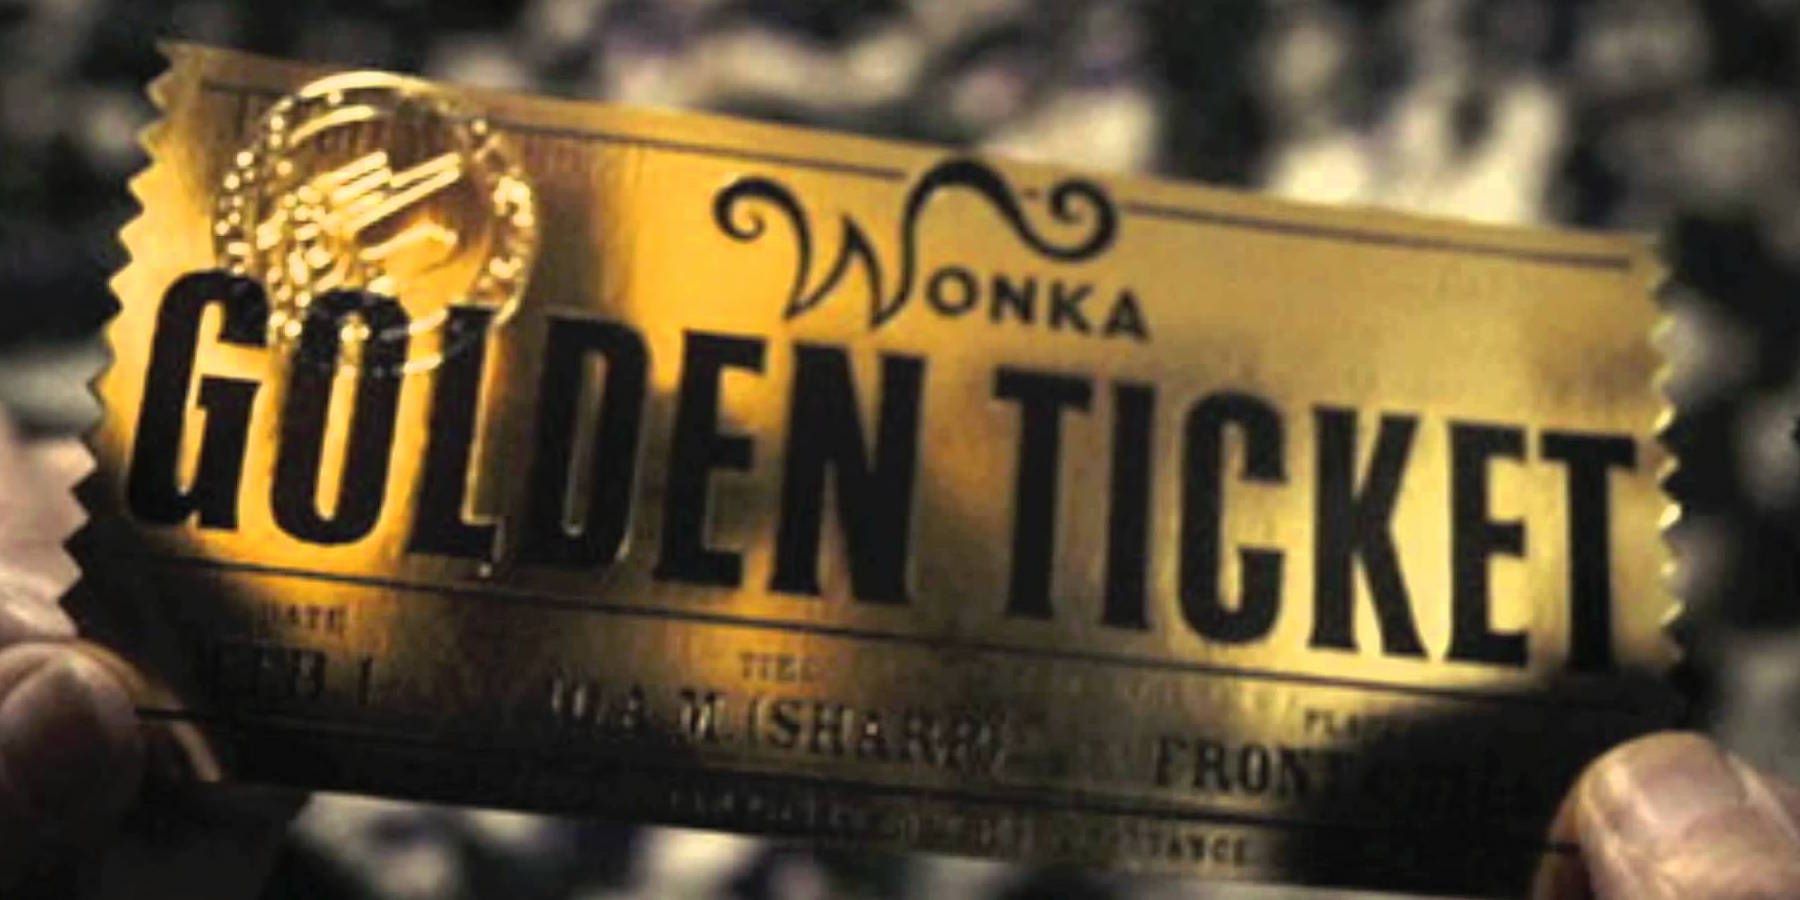 Golden Tickets from Willy Wonka and the Chocolate Factory